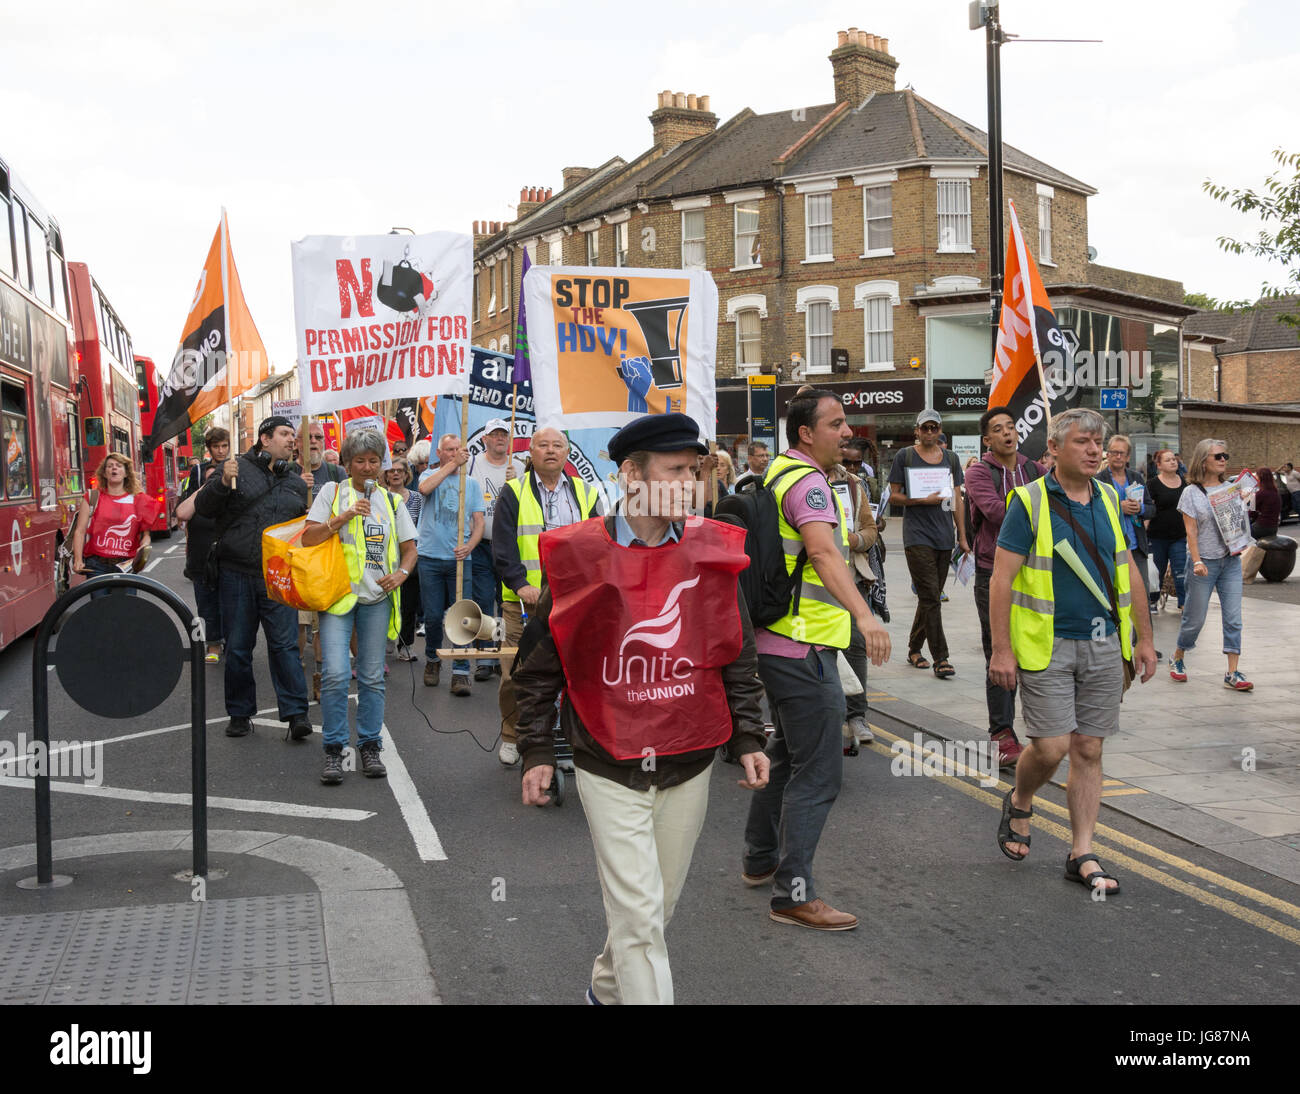 Haringay, London, UK 3rd July 2017. Protesters march against the Haringay Development Vehicle, ending at Haringay Civic Centre. The Haringay Development Vehicle, or HDV for short, is a controversial partnership between Haringey Council and Lendlease, a property development group. Protesters fear that the plan will see increasing gentrification within the borough as existing social housing stock will be demolished with no guarantee of affordable replacements. Haringay council put the proposal to the vote at the Civic Centre tonight. Credit: Patricia Phillips/ Alamy Live news Stock Photo